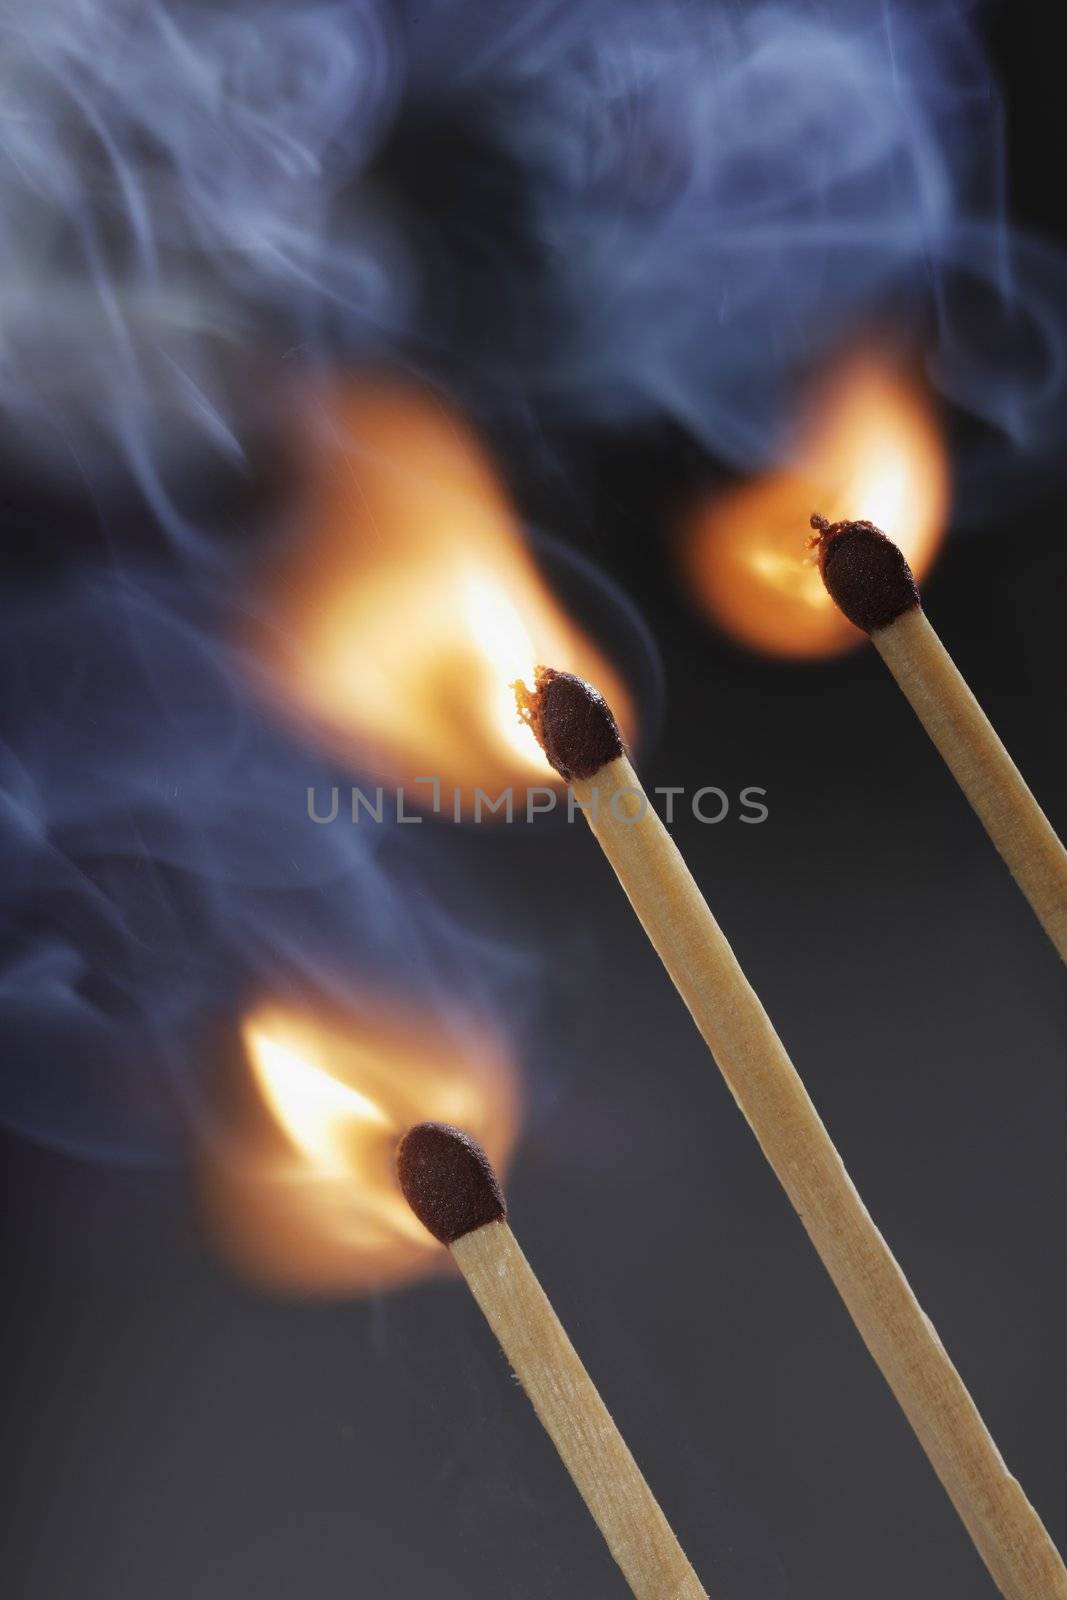 Three safety matches igniting simultaneosly